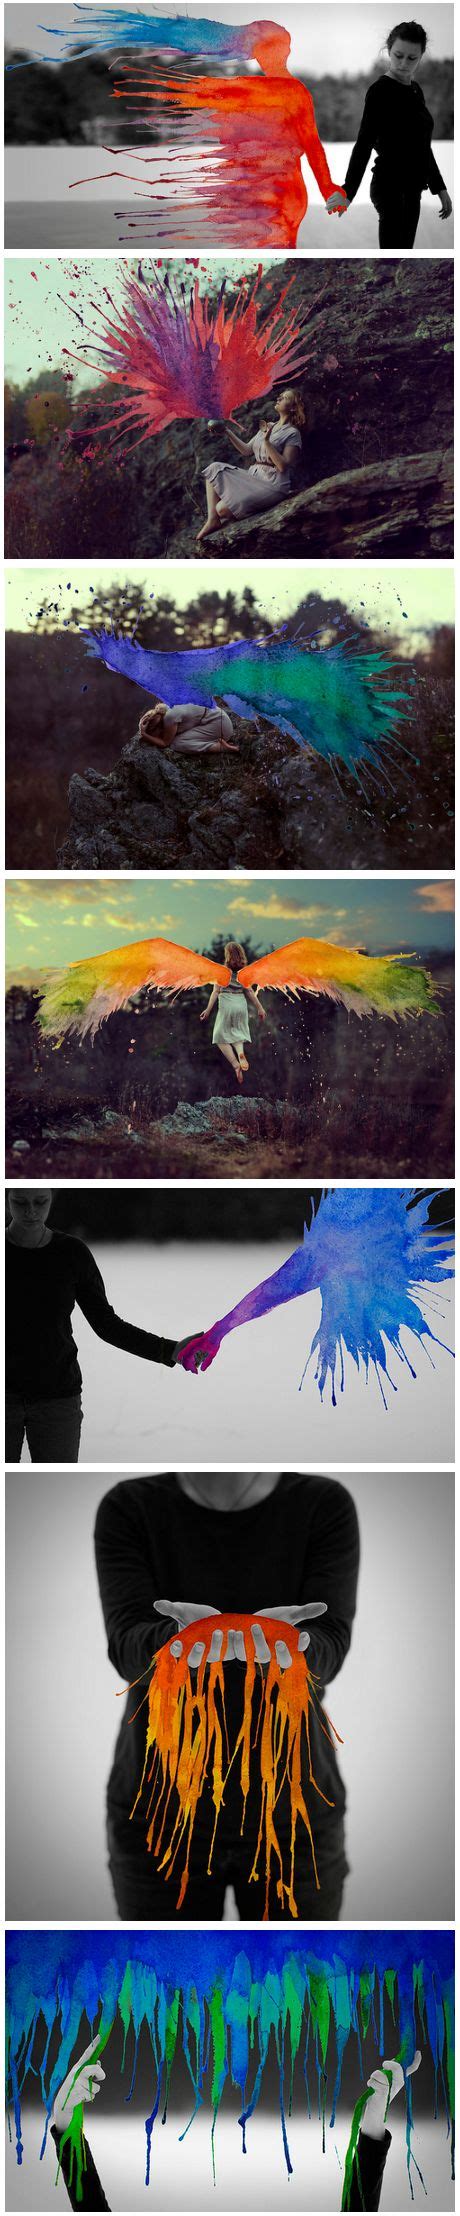 Photographs And Watercolors Merge In Surreal Paintings By Aliza Razell